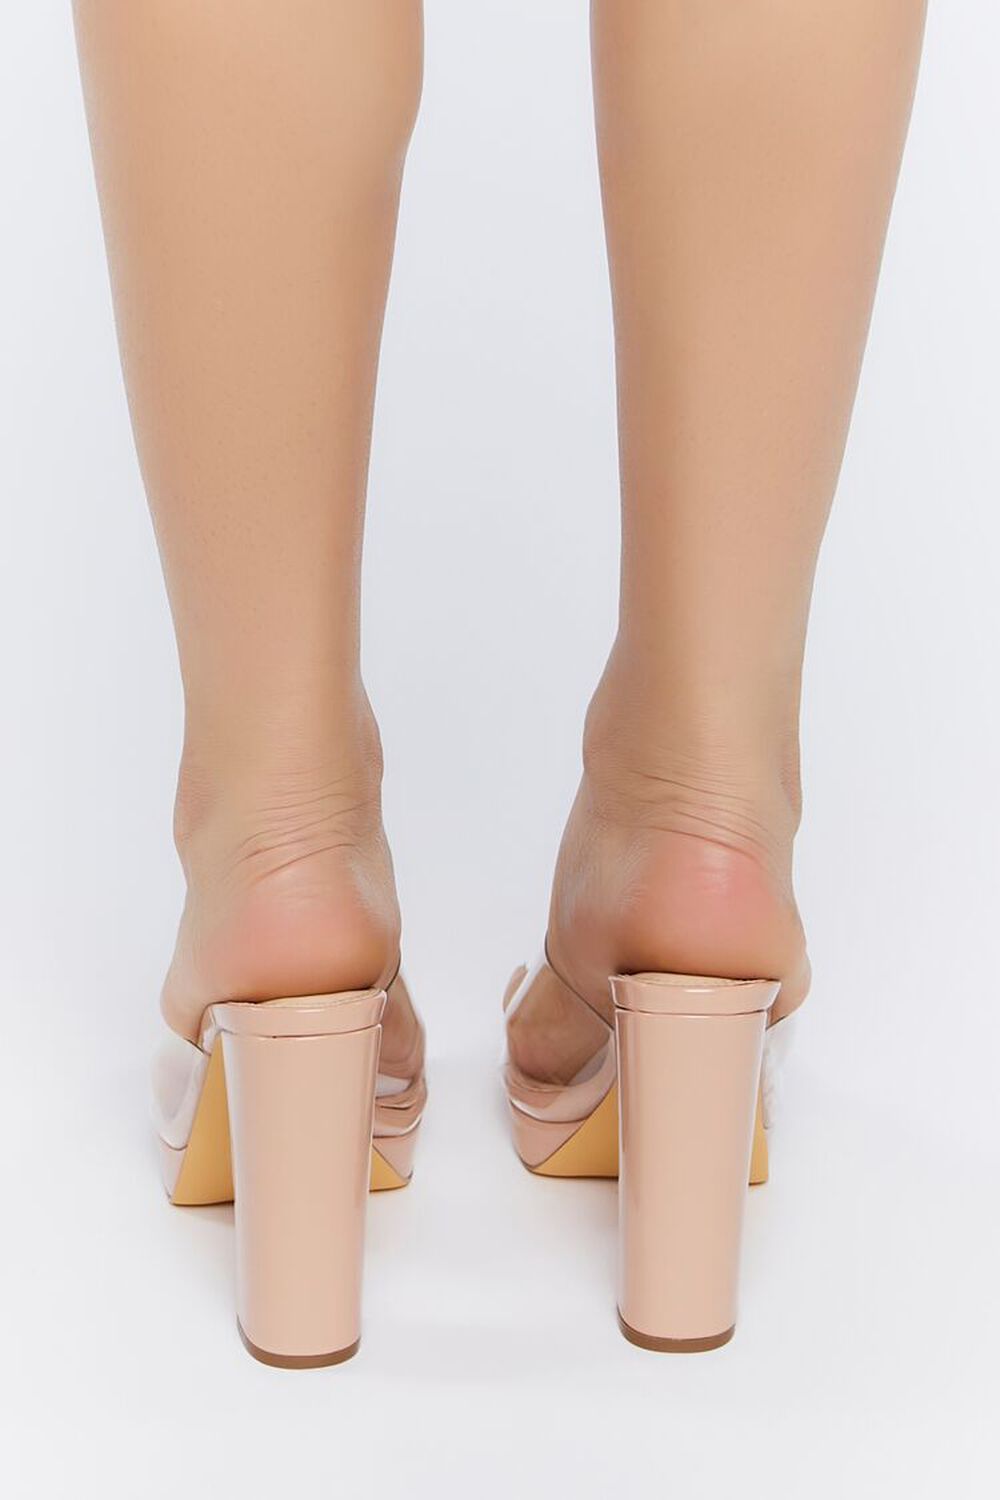 NUDE Clear Strap Chunky Heels, image 3